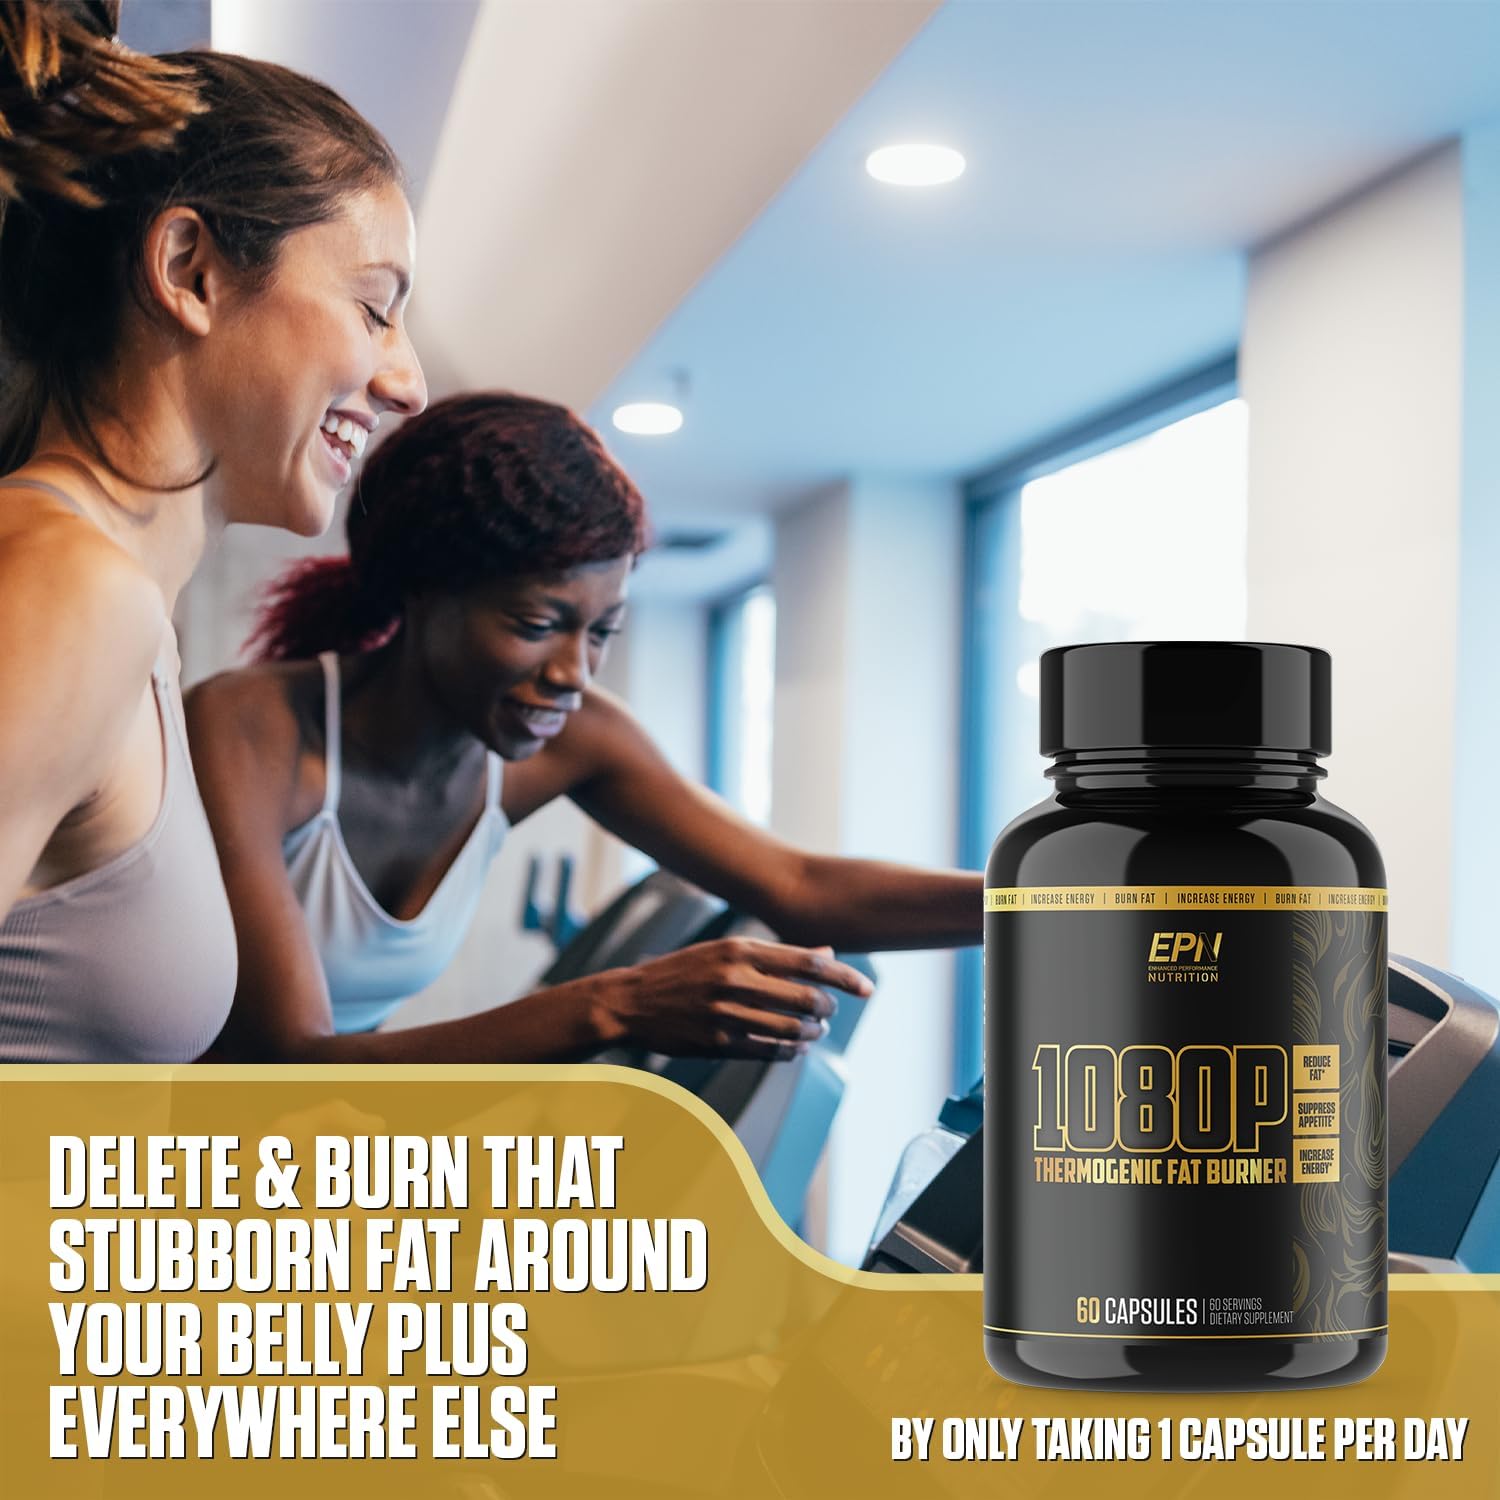 1080p Thermogenic Fat Burner | #1 Weight Loss Supplement Pills to Reduce Fat, Suppress Appetite, Boost Metabolism, Increase Energy  Focus w/L-Carnitine, Yohimbe Bark, Green Tea + More - 60 Servings